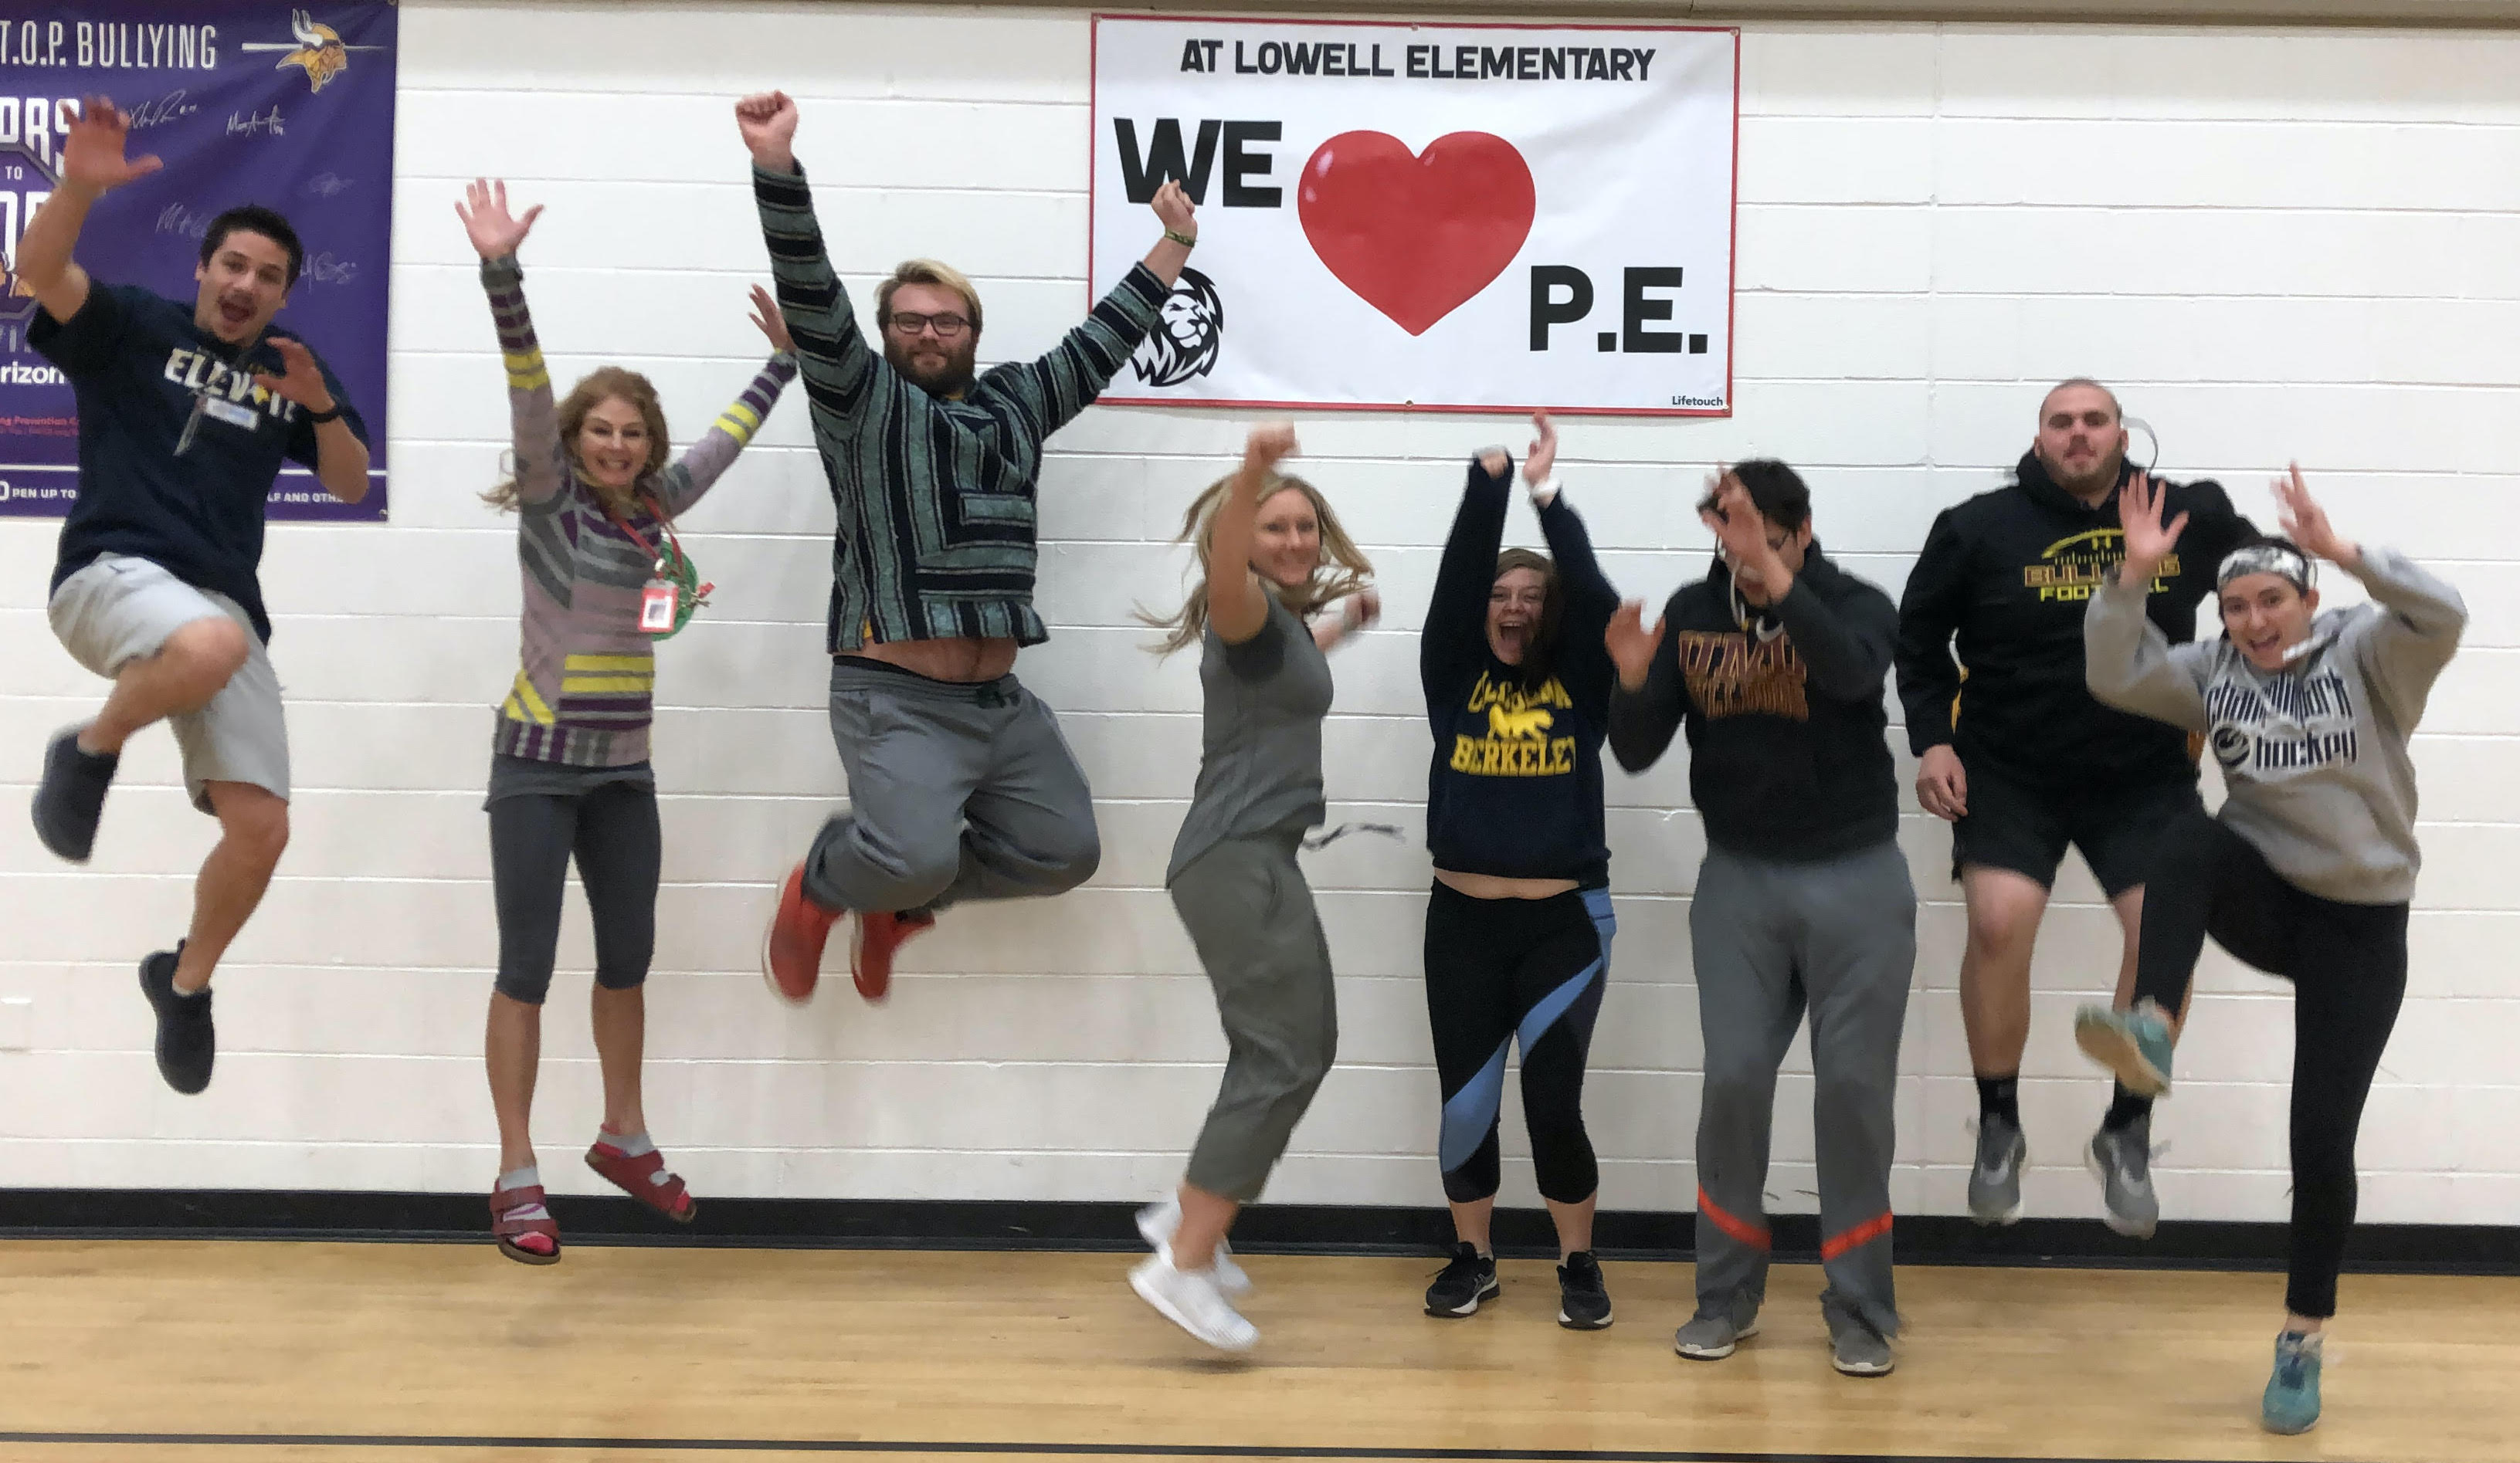 8 adults jumping with excitement for a photo op in a elementary school gymnasium